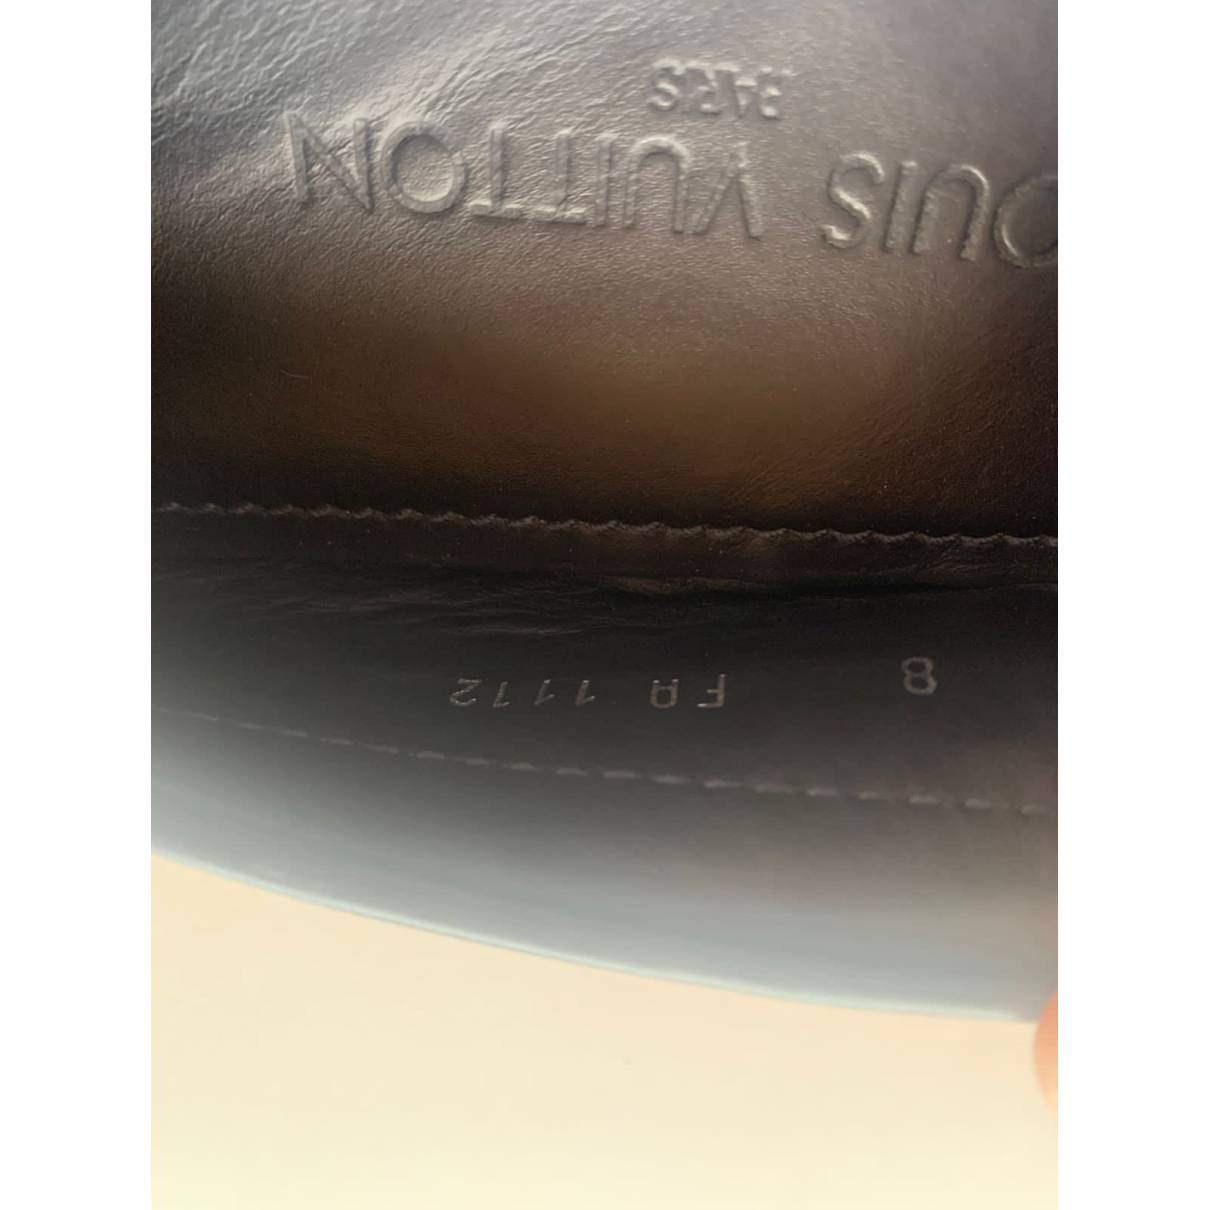 Monte carlo leather flats Louis Vuitton Black size 8 UK in Leather -  32671557